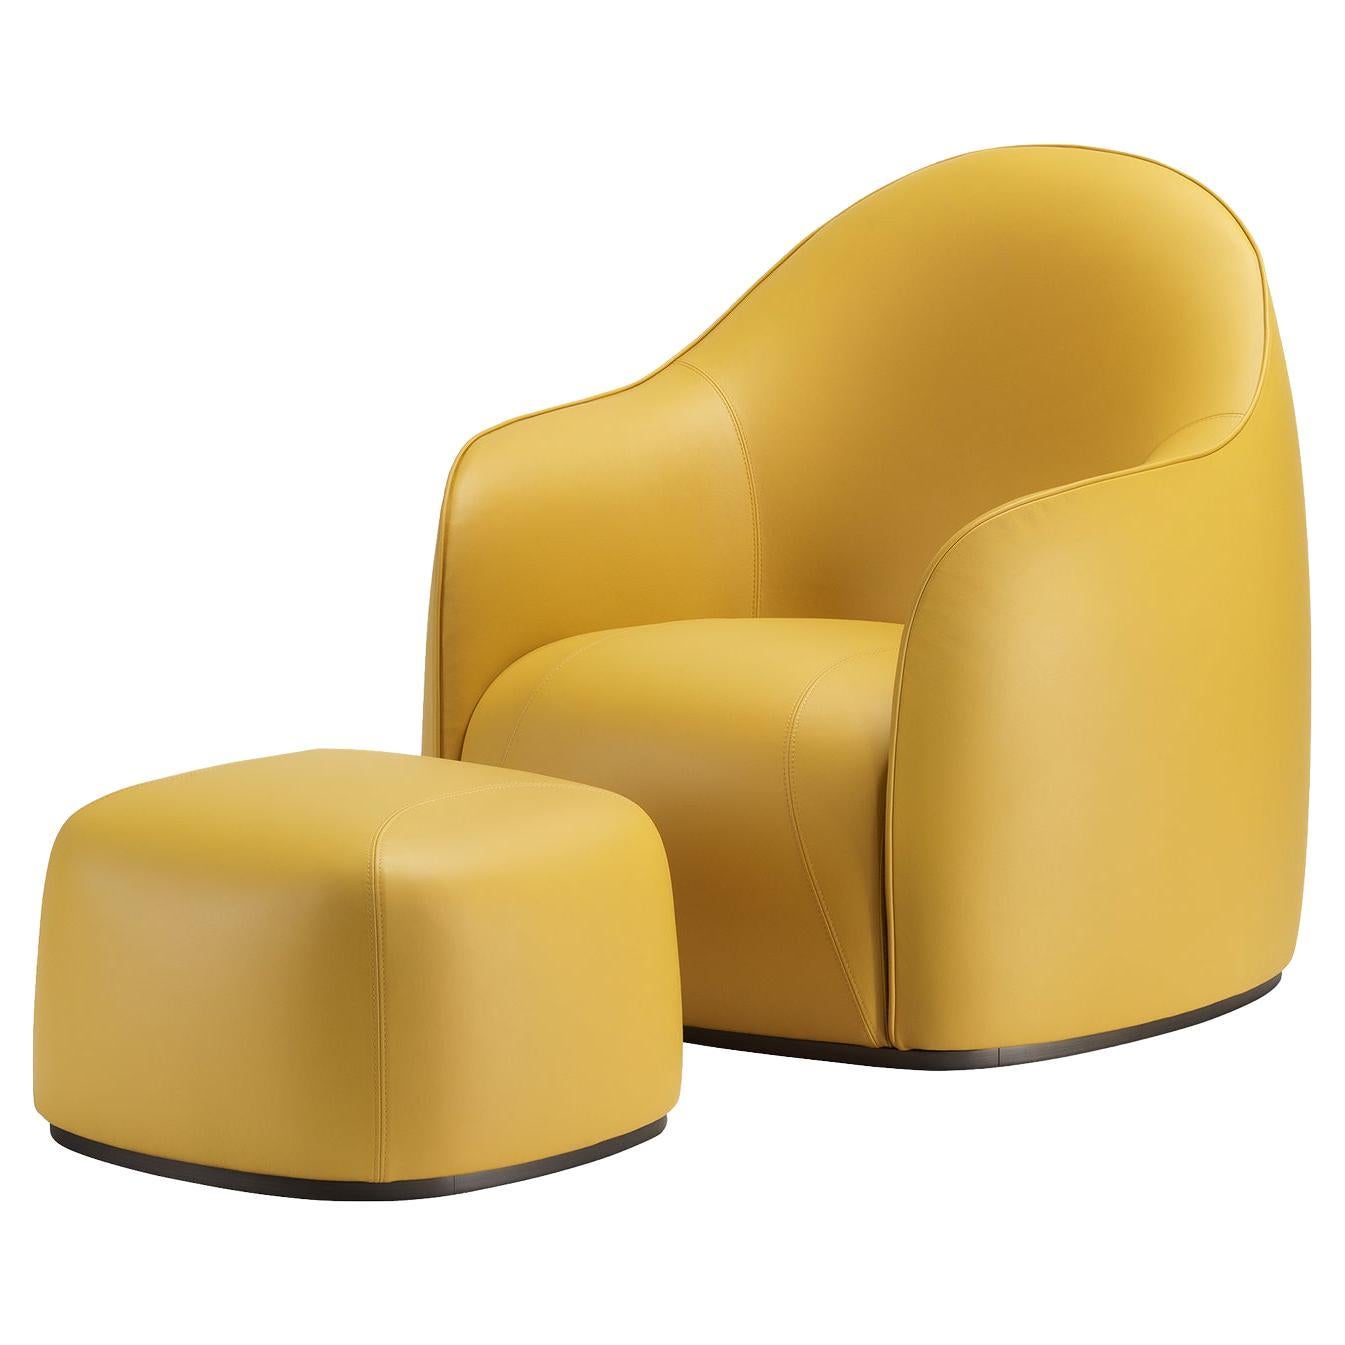 Sweet Set of Mustard Armchair and Pouf by Elisa Giovannoni